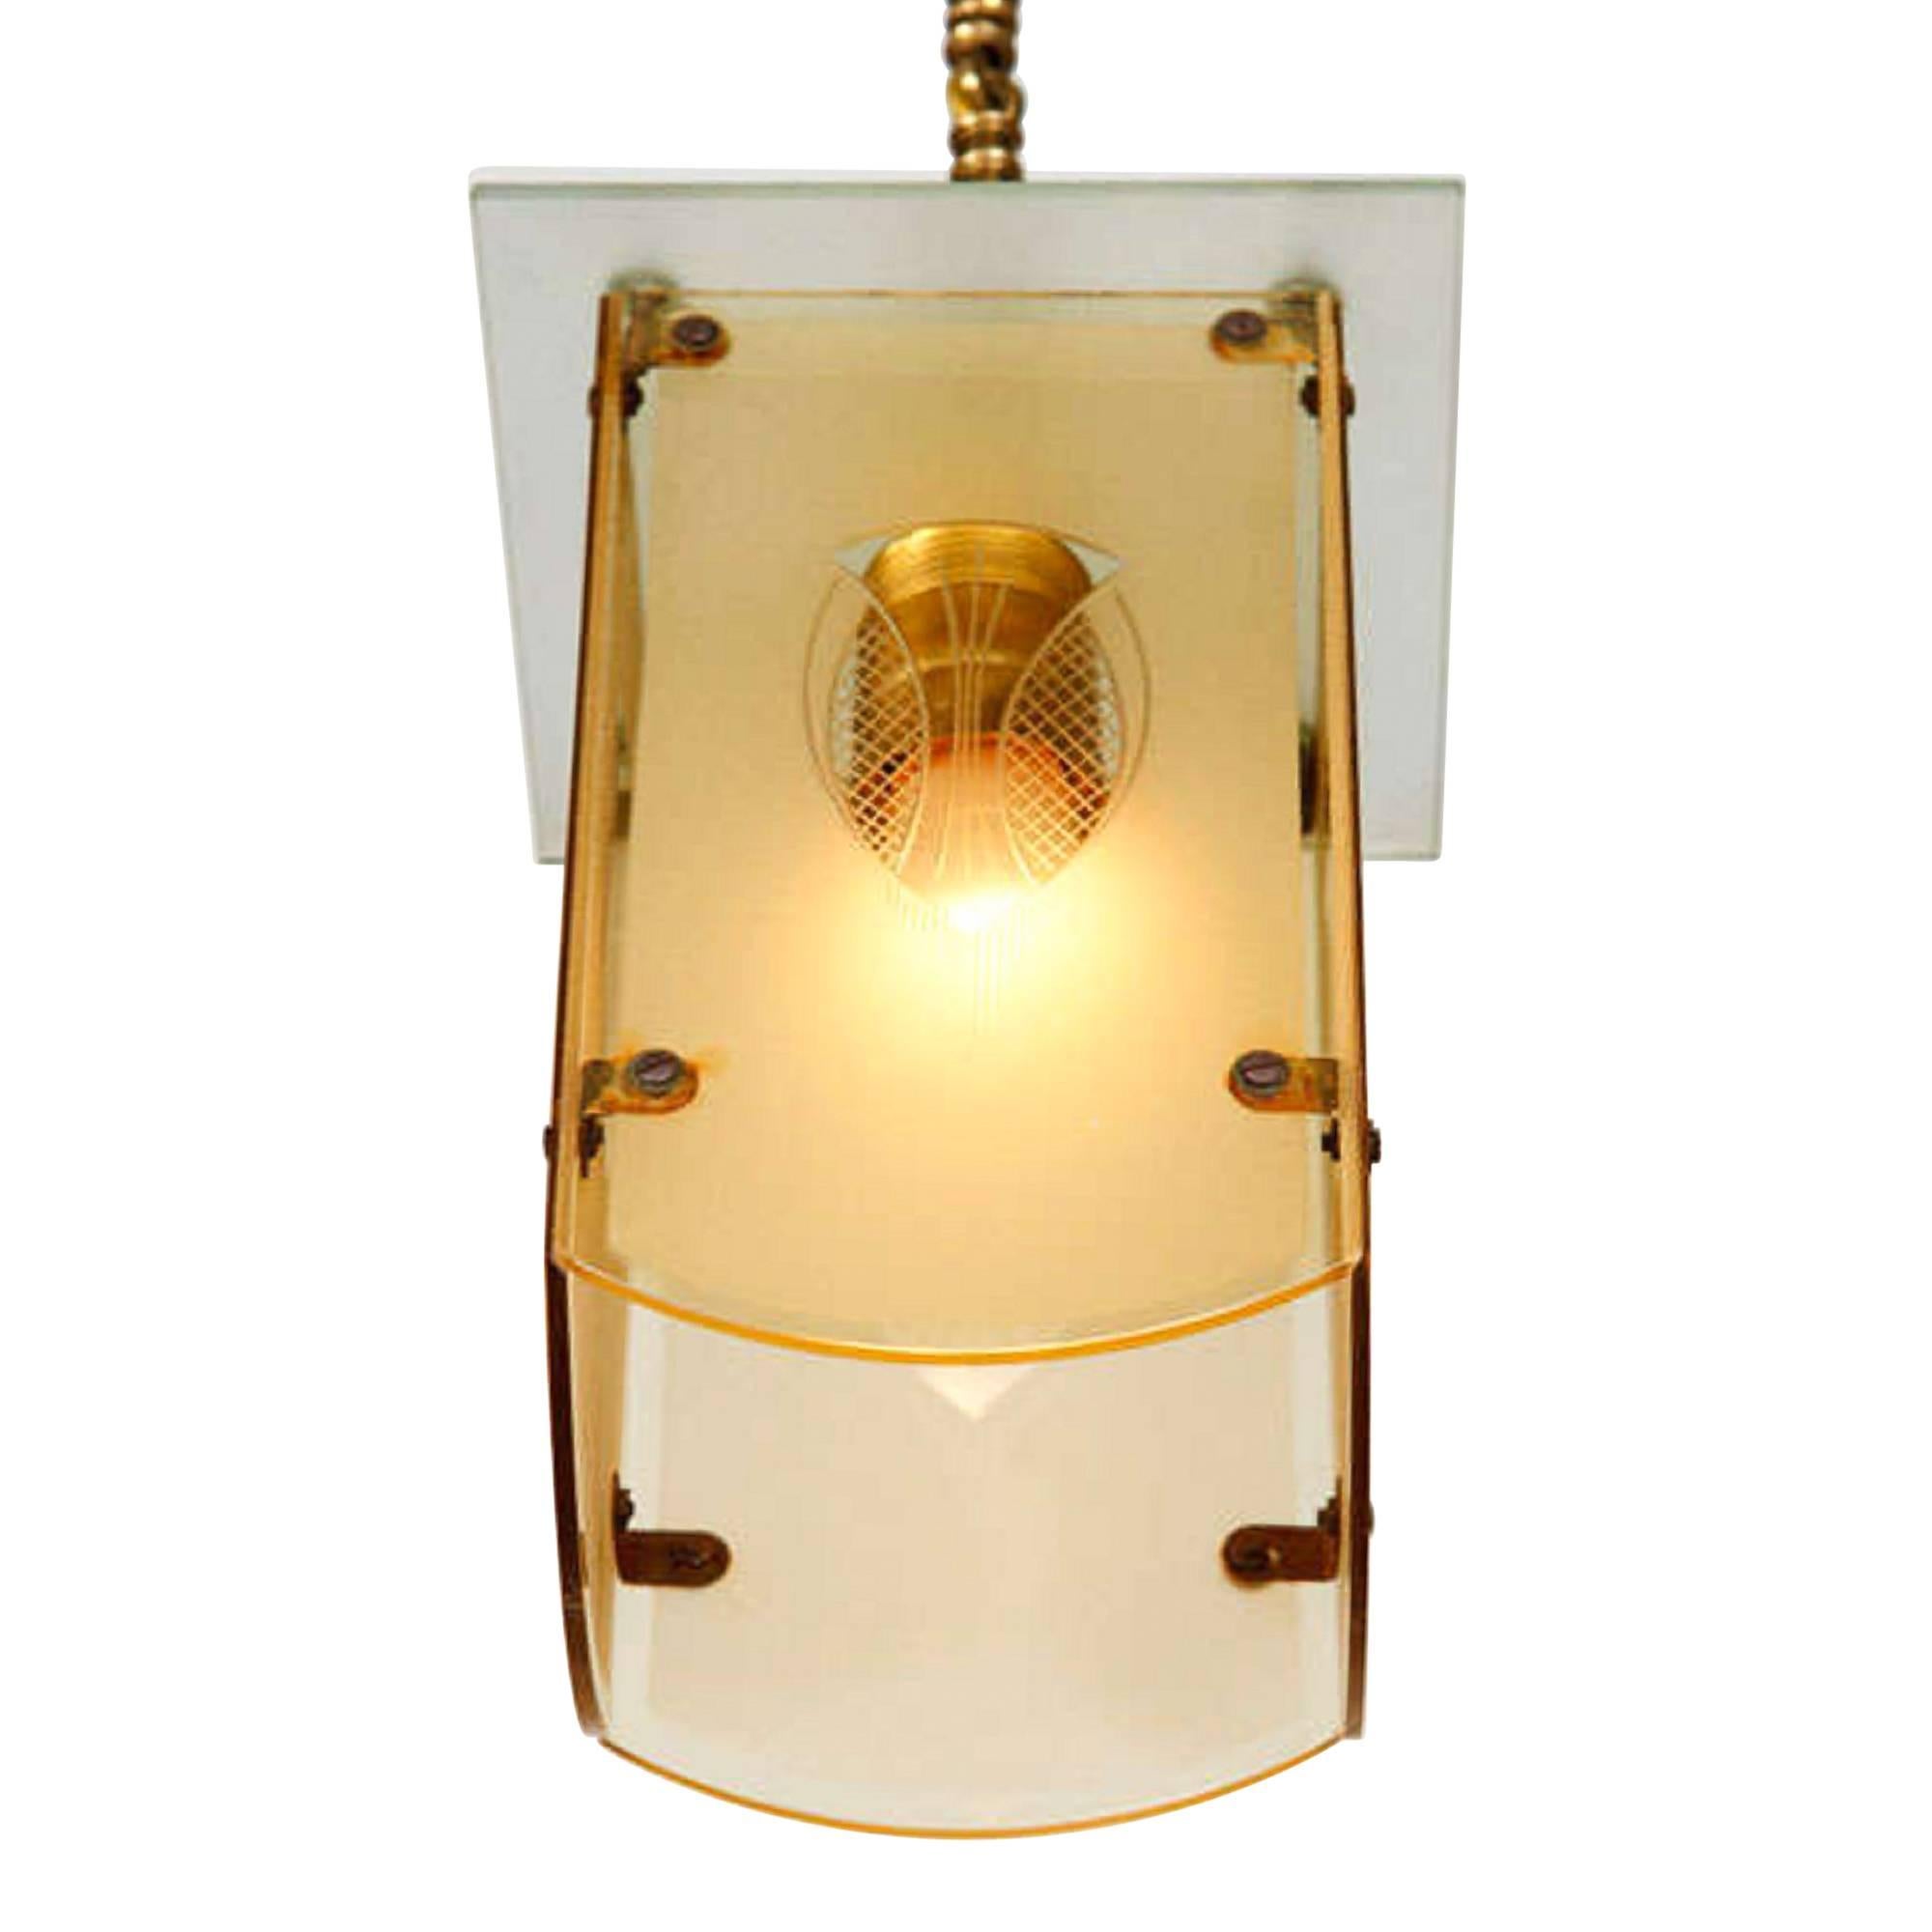 Hanging lamp, the glass shade with an Art Deco motif, German, 1920s. Suspended by a chain from the ceiling canopy. The fixture measures 6 in square, height 7 3/4 in. 